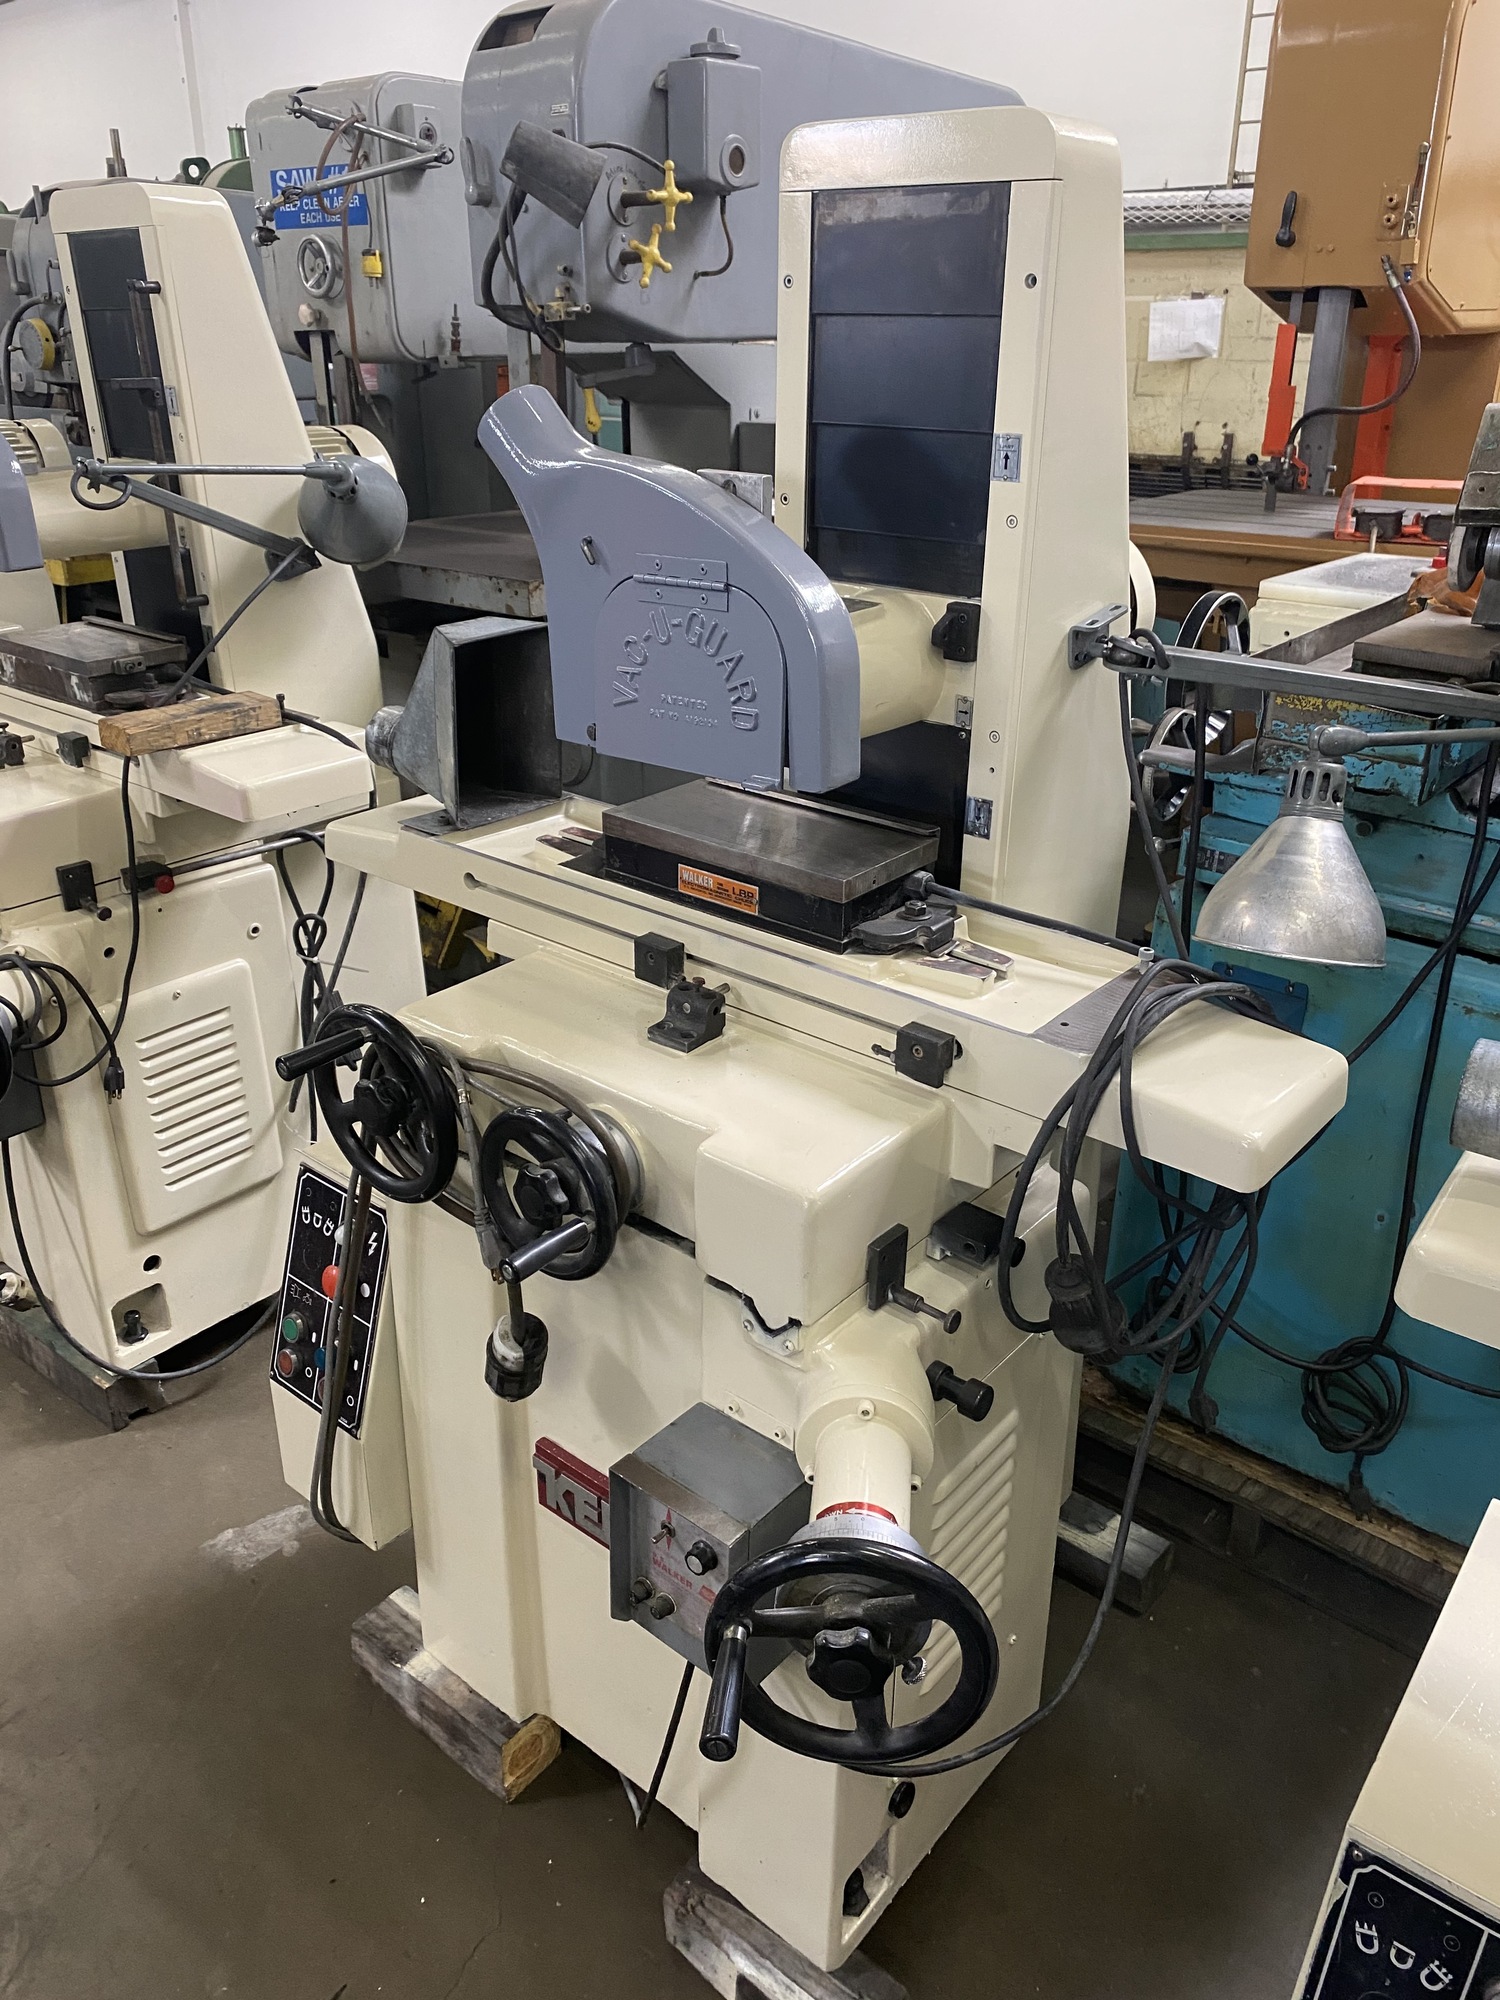 1990 KENT KGS-200 Reciprocating Surface Grinders | Compass Mechanical Co. (Compass Machine Tools)